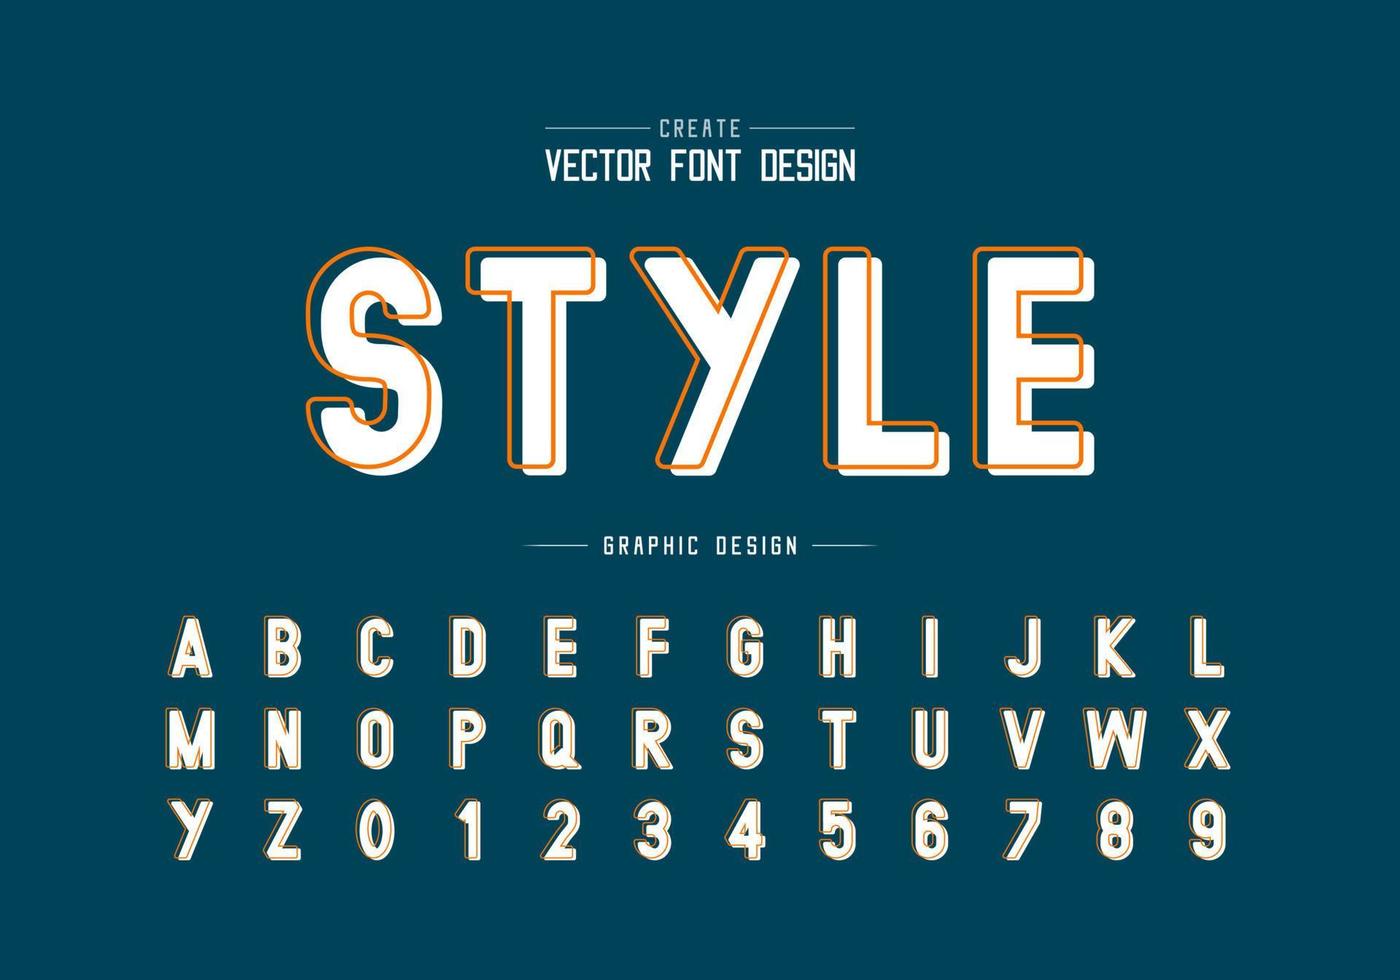 Line font and alphabet vector, Style typeface letter and number design, graphic text on background vector